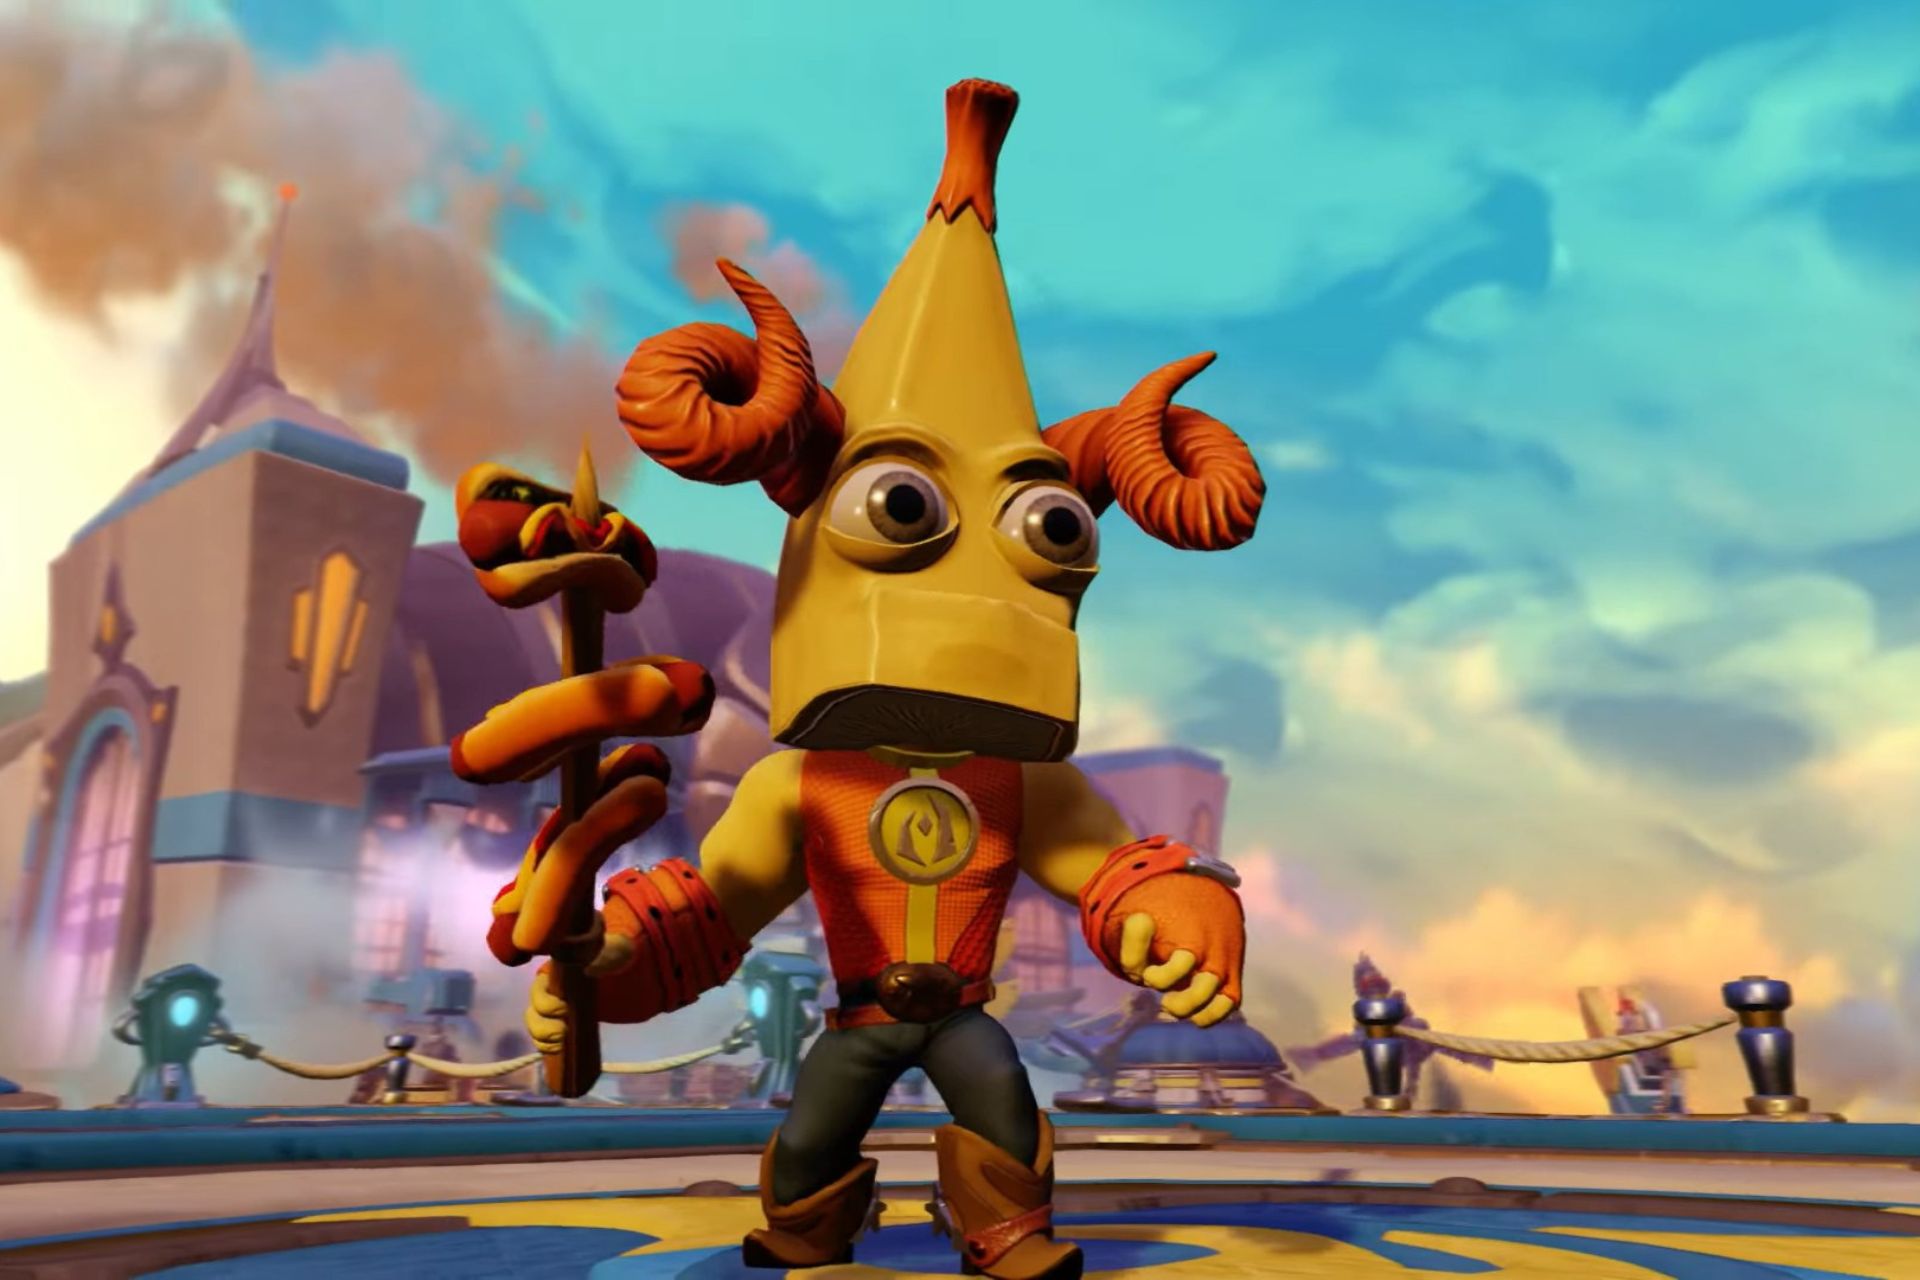 Toys for Bob, the game studio behind Skylanders, is going independent from Microsoft